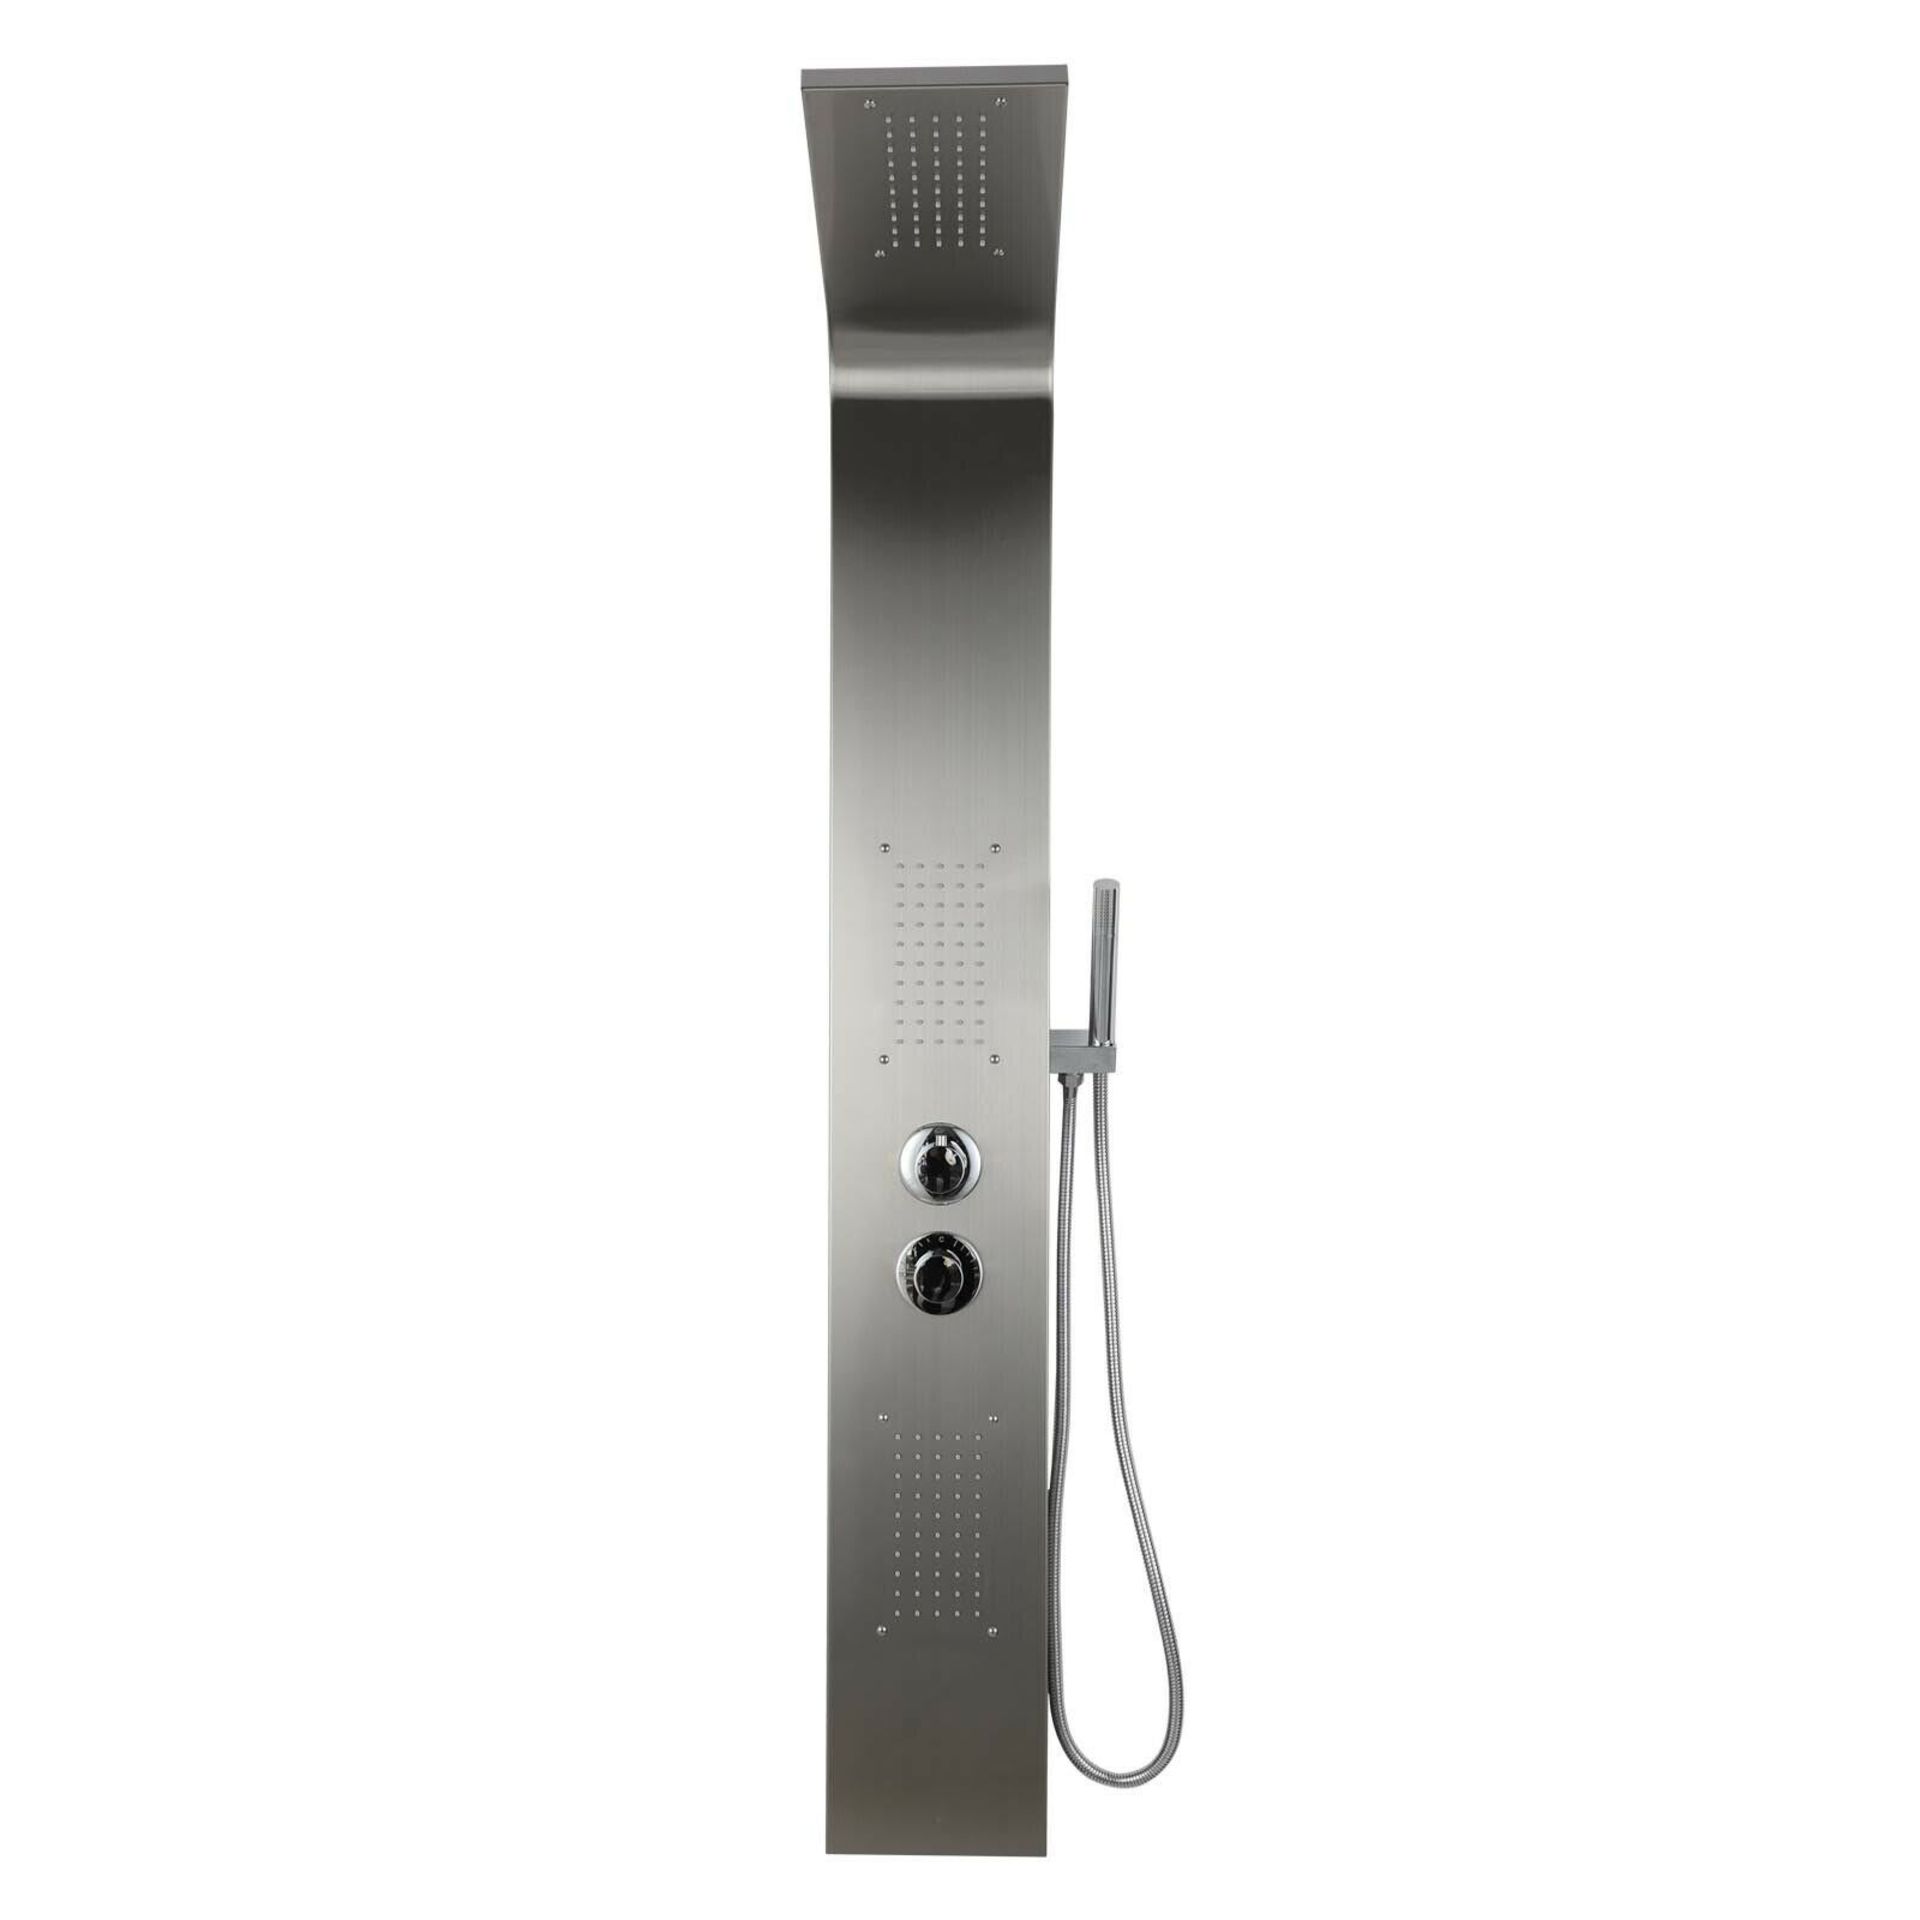 (DE10) Chrome Modern Bathroom Shower Column Tower Panel System With Hand held Massage Jets. RRP... - Image 3 of 3